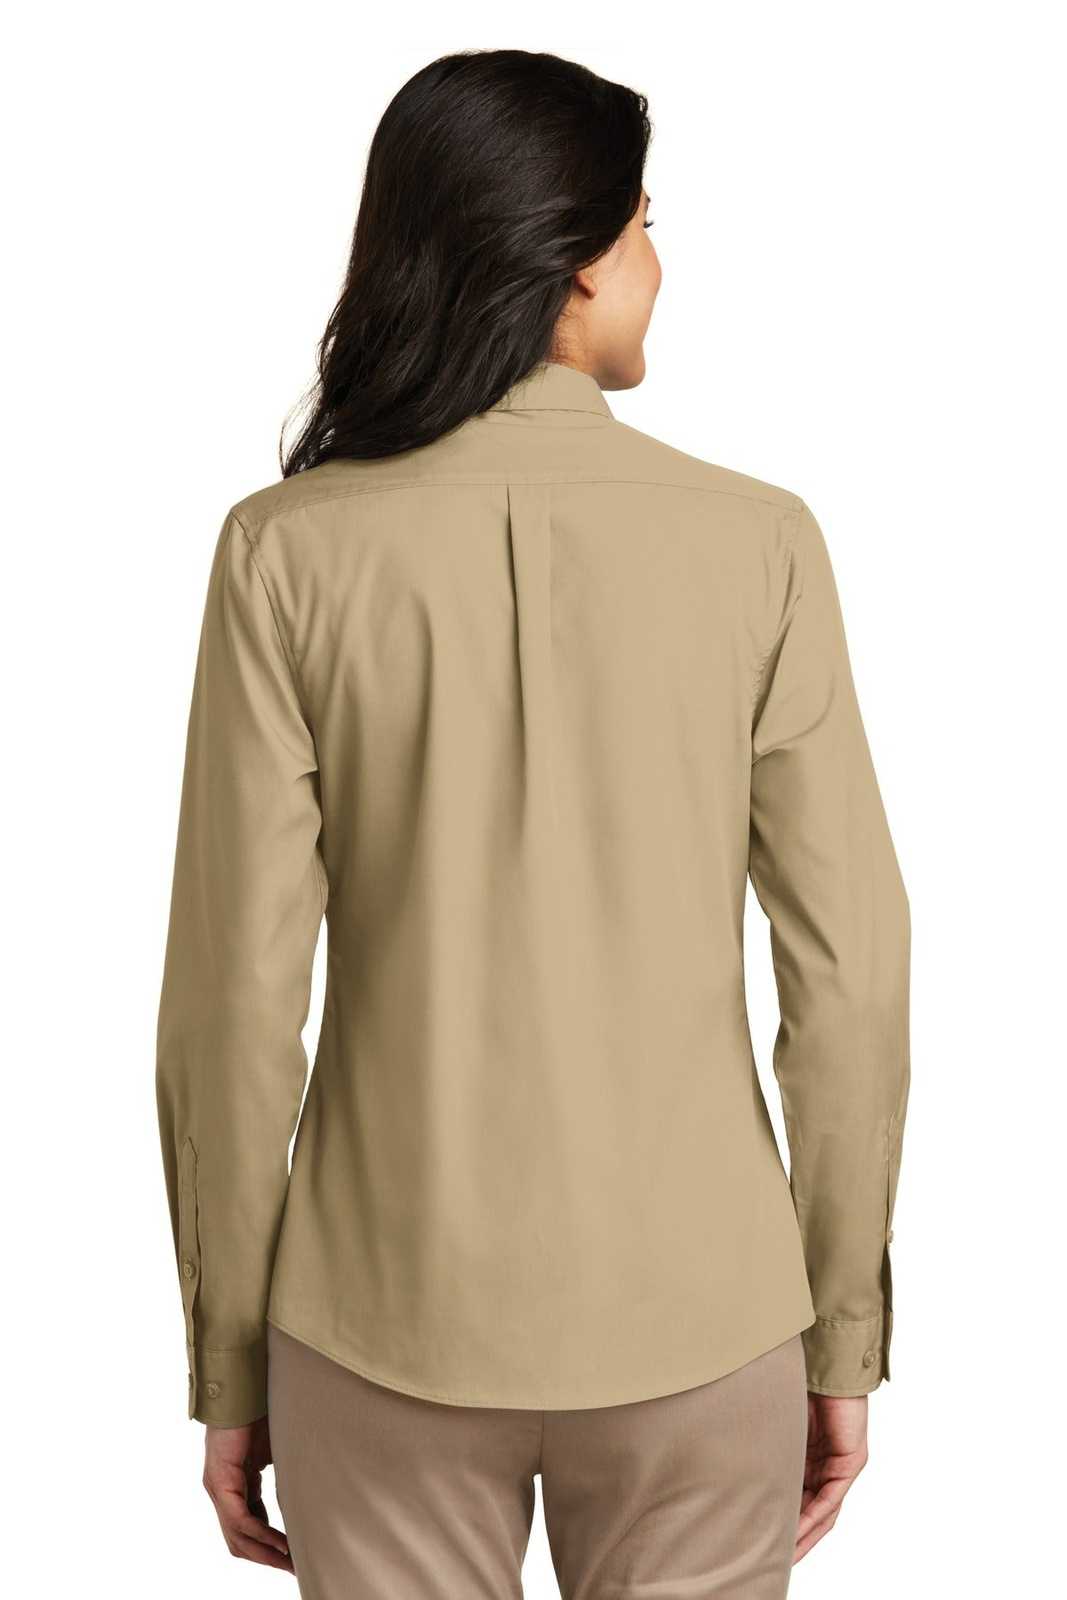 Port Authority LW100 Ladies Long Sleeve Carefree Poplin Shirt - Wheat - HIT a Double - 2